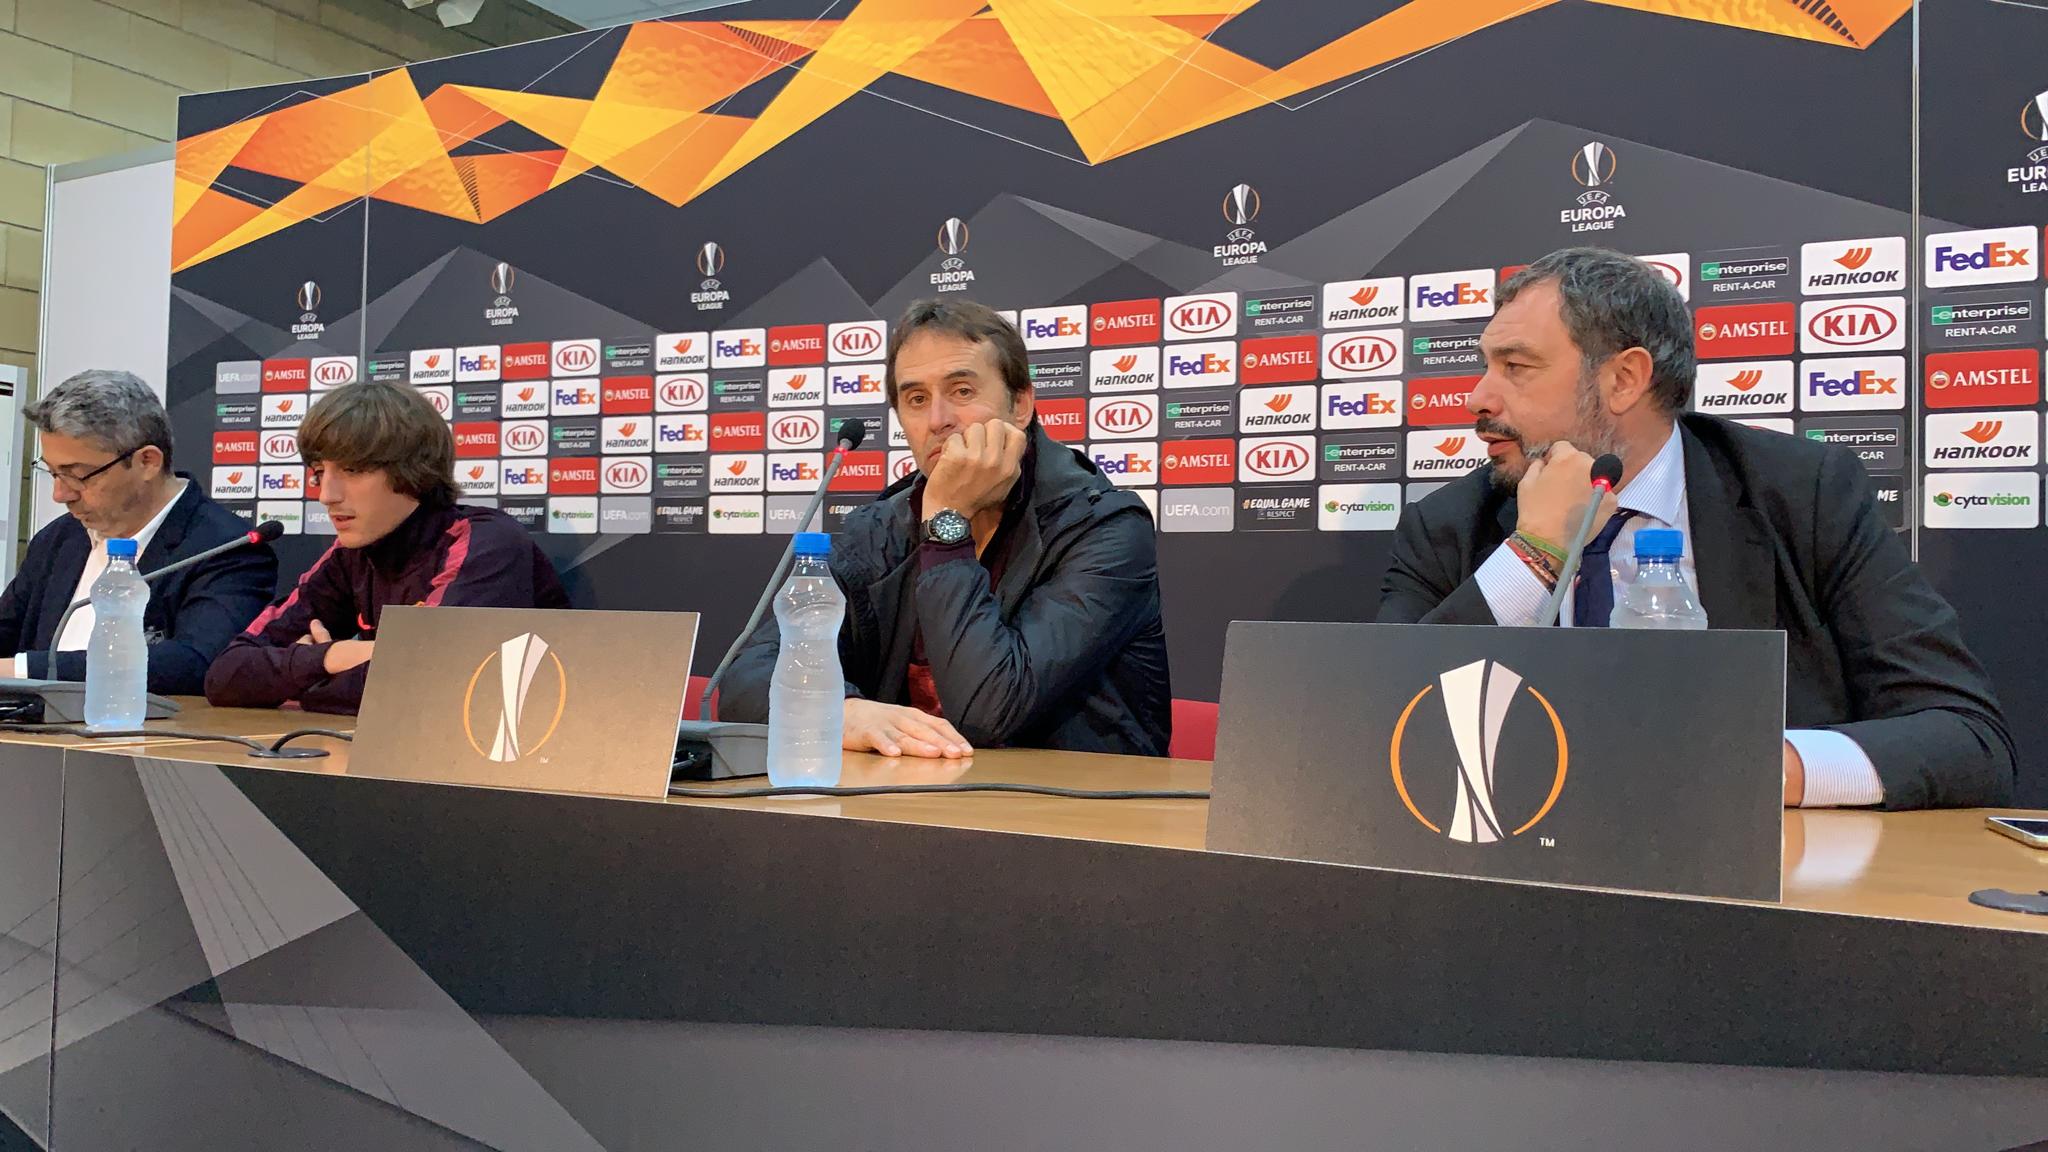 Bryan Gil and Julen Lopetegui's press conference in Cyprus